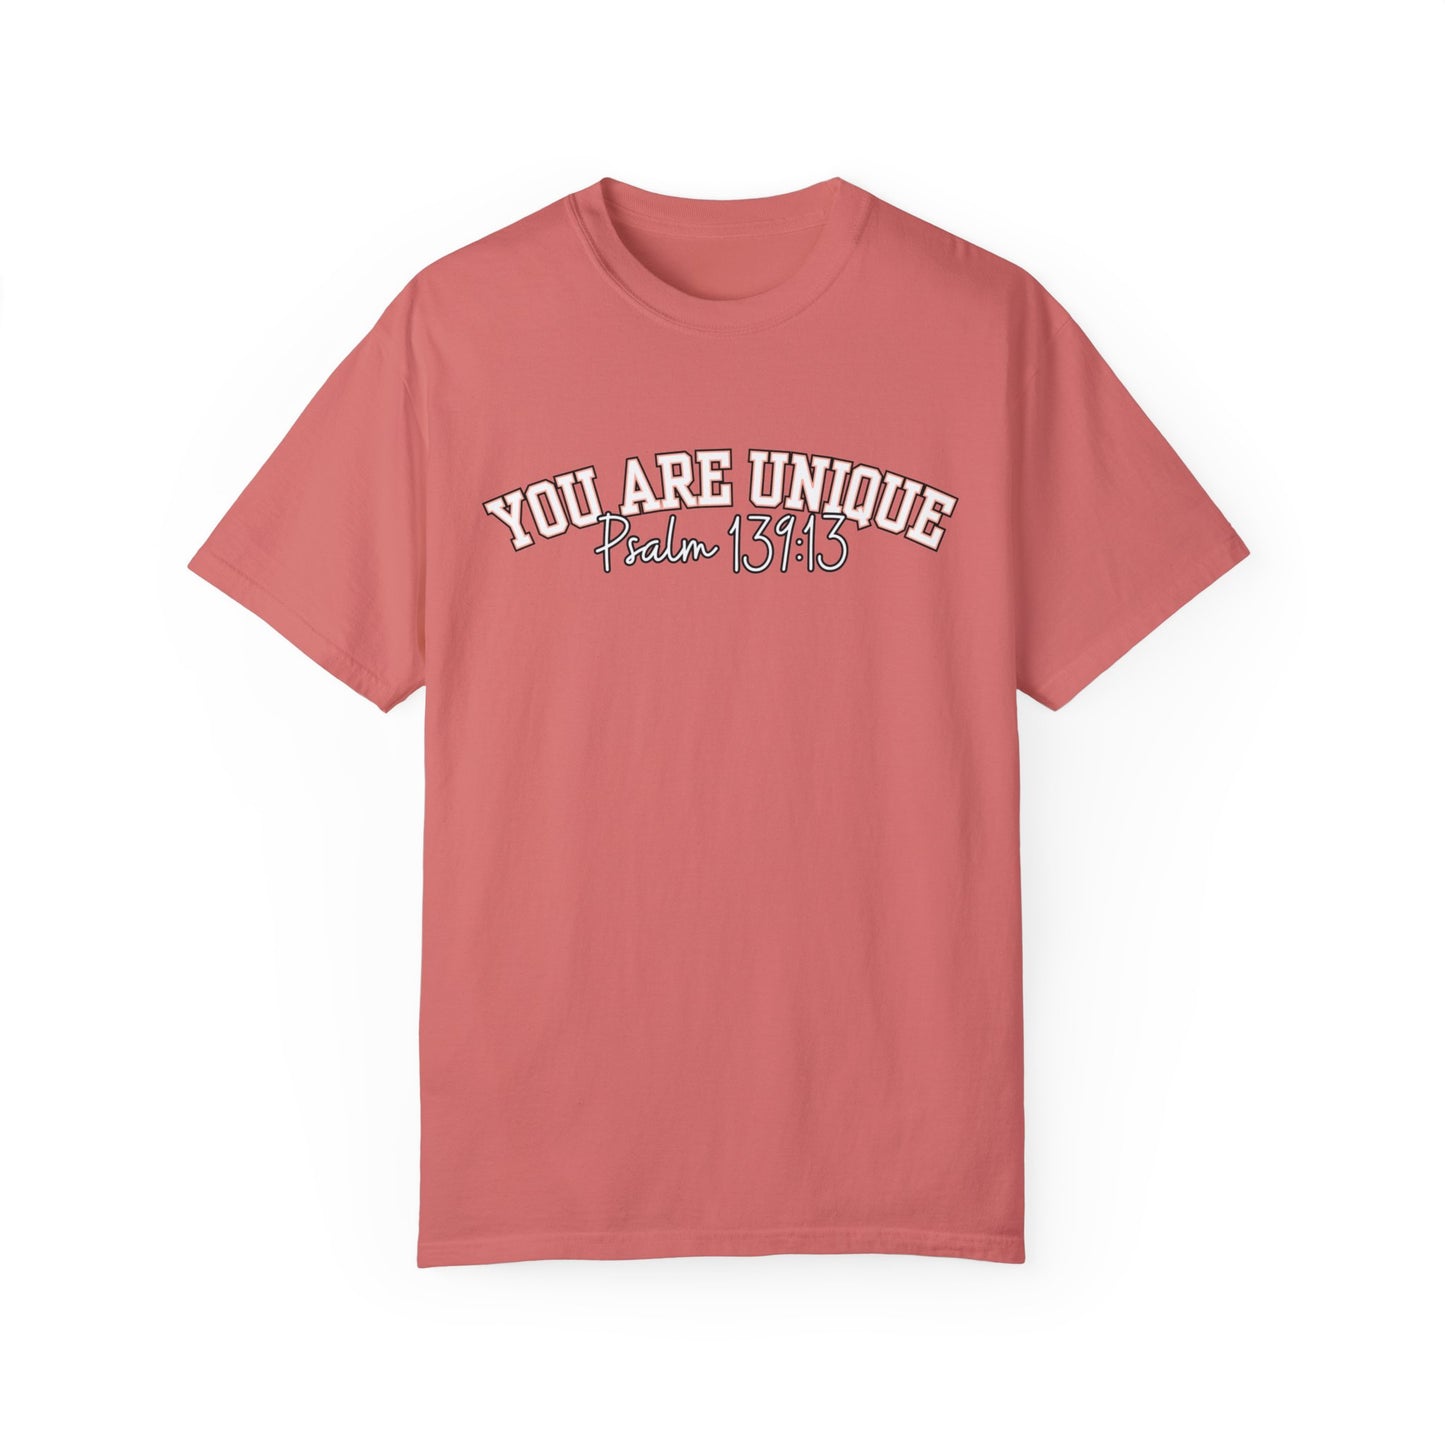 Women's Comfort Colors Tee: 'You Are Unique - Psalm 139:13' Inspirational Christian Shirt for Stylish Comfort! - Eddy and Rita